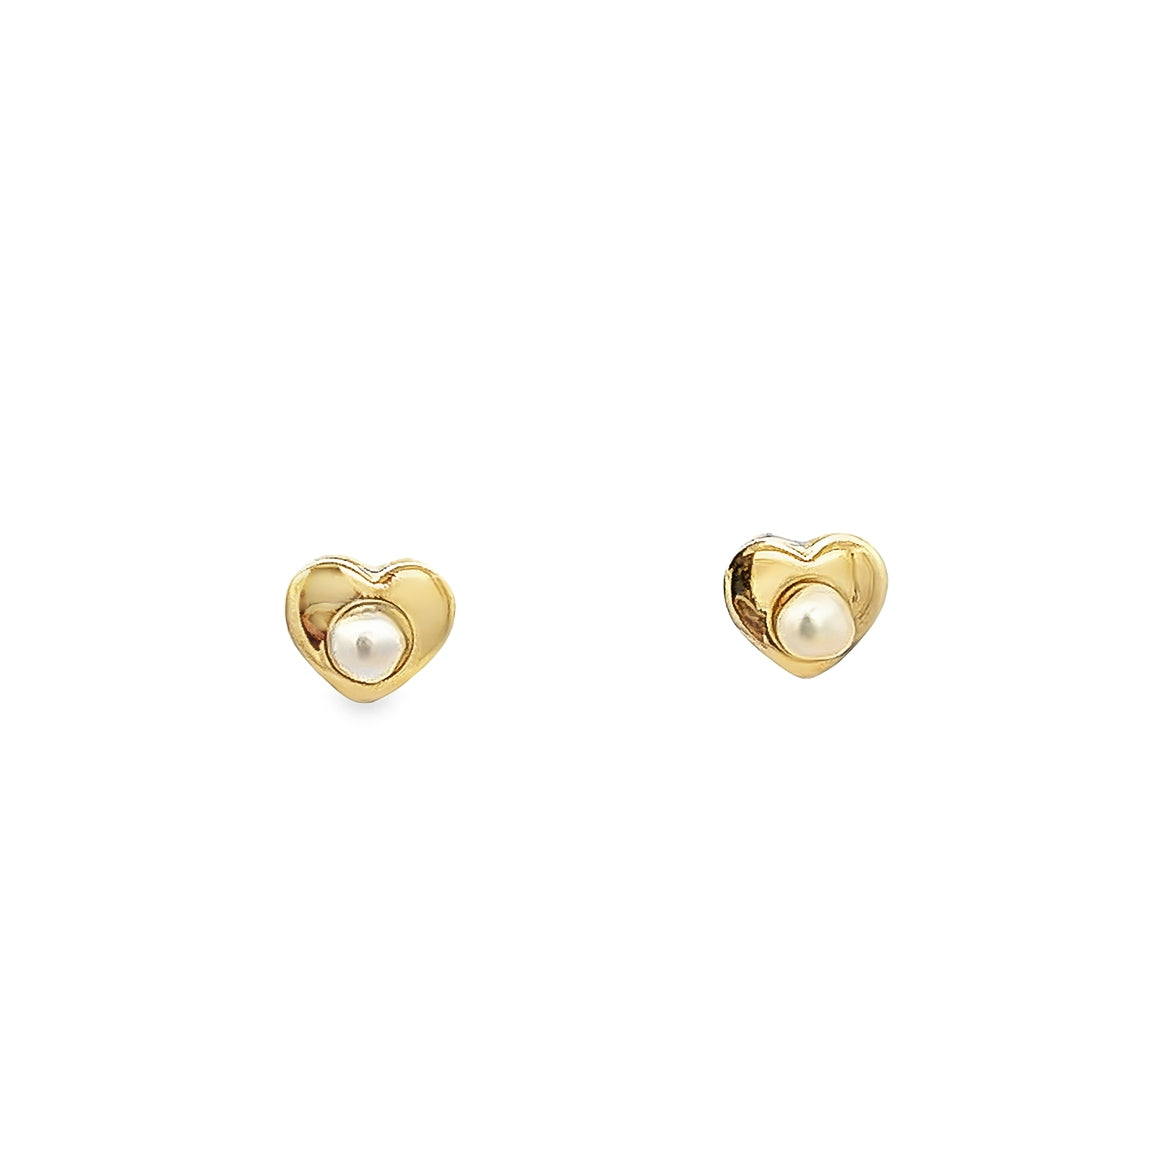 14K GOLD HEART WITH CENTER PEARL EARRINGS